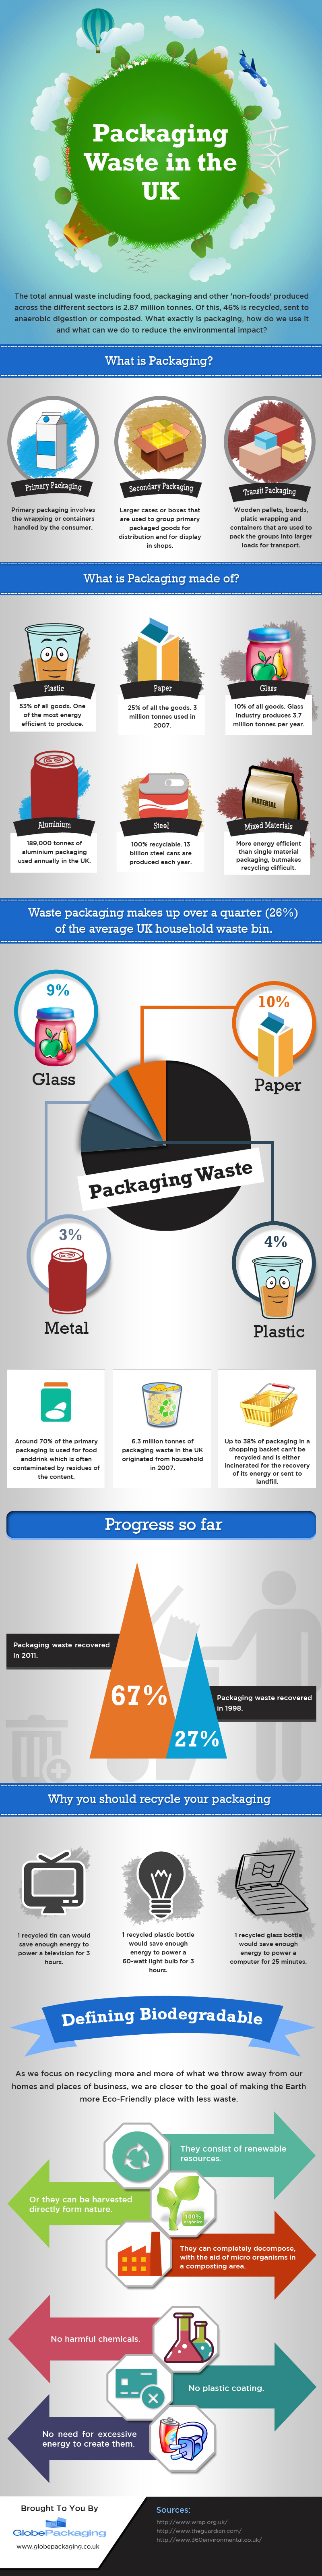 Facts and Statistics about Packaging Waste in UK